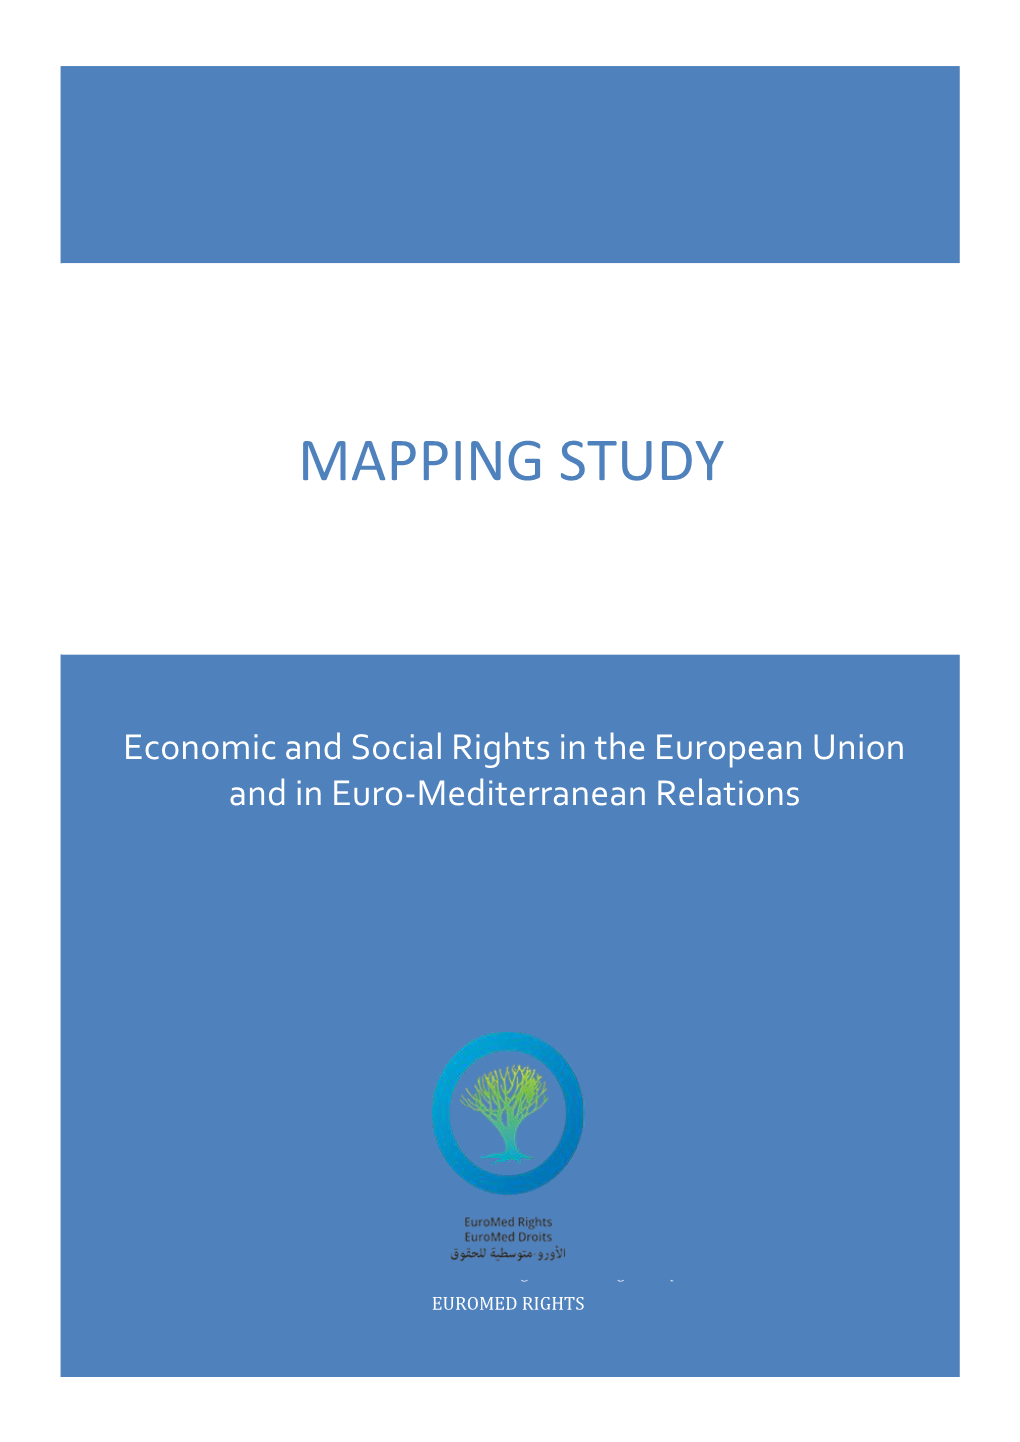 Economic and Social Rights in the European Union and in Euro-Mediterranean Relations